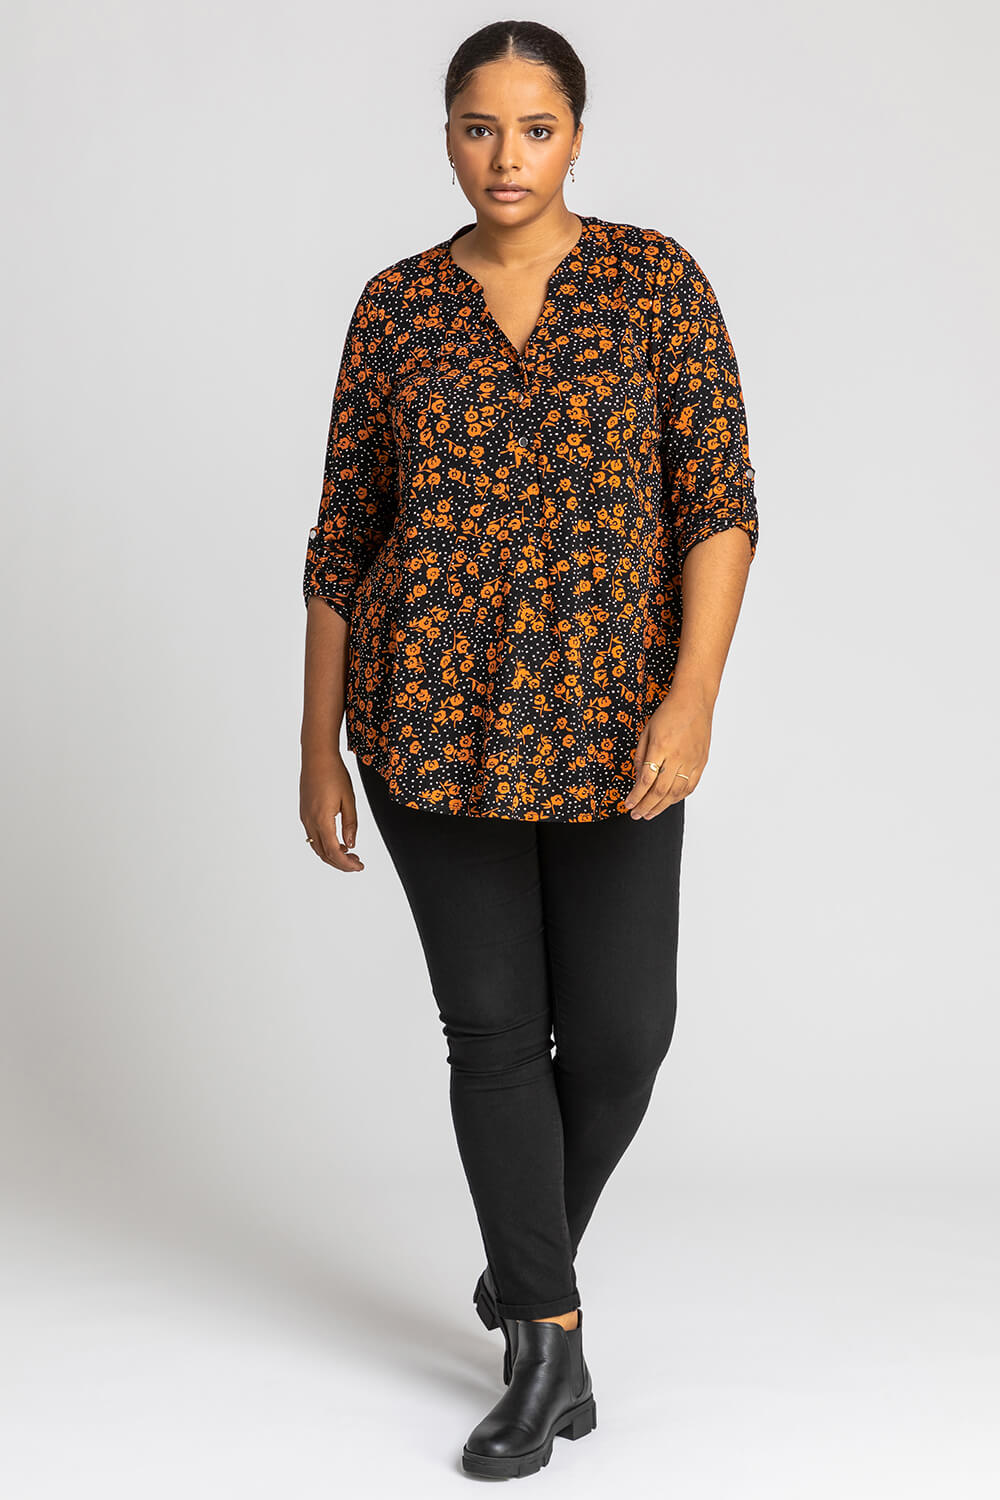 Rust Curve Ditsy Floral Print Top, Image 3 of 4